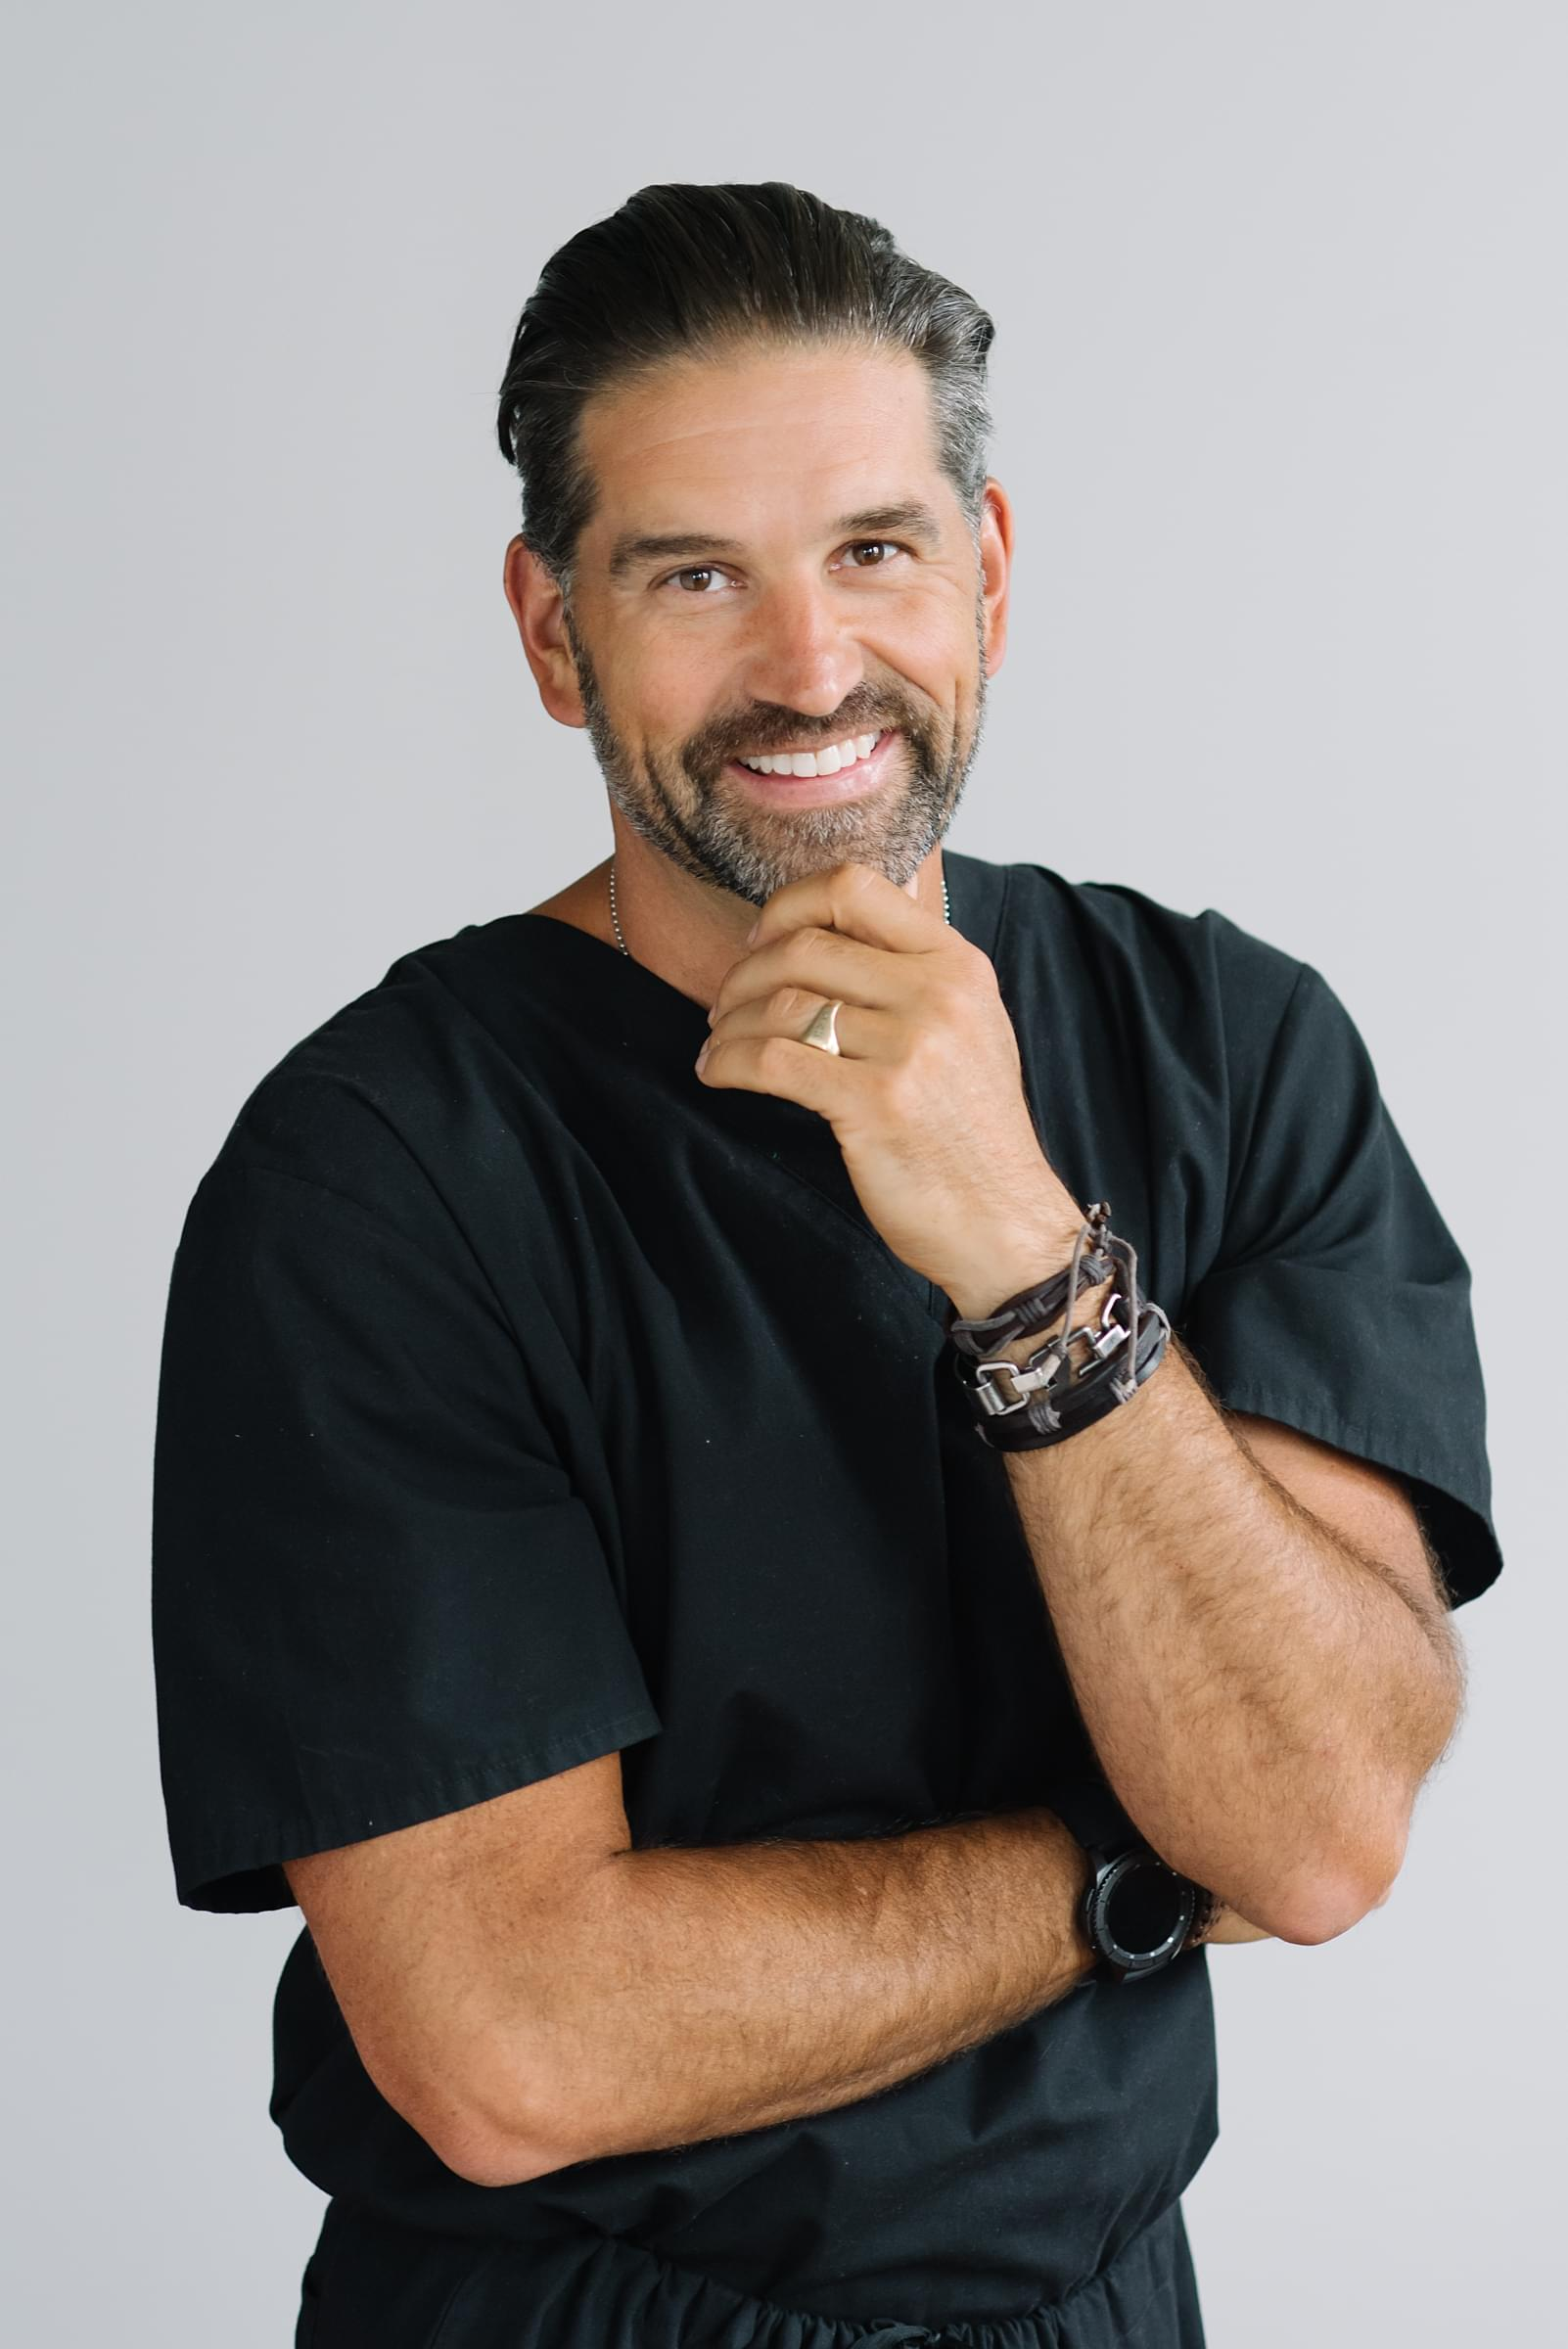 Dr. Dave Steuer